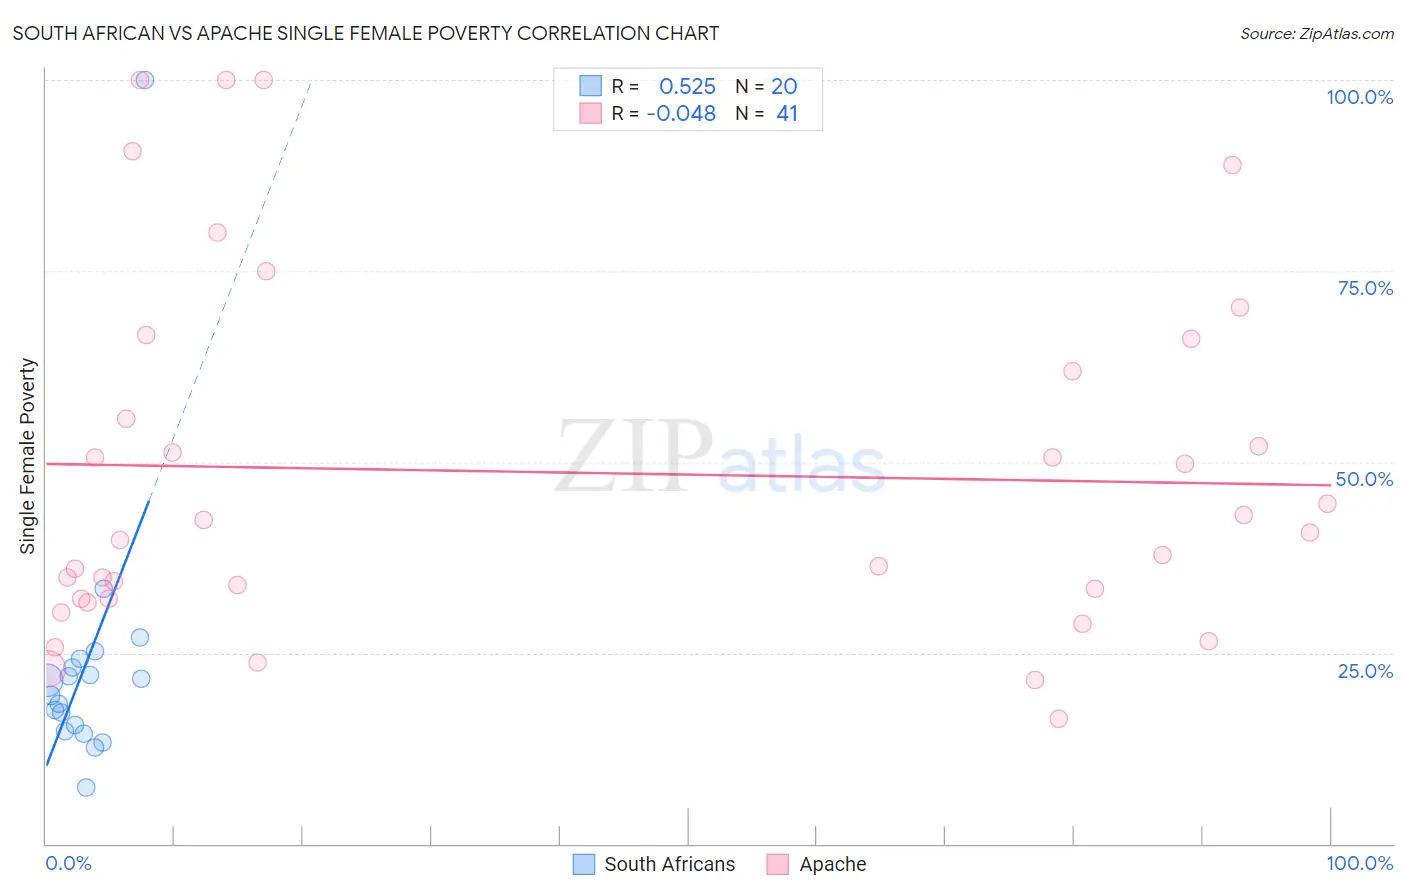 South African vs Apache Single Female Poverty